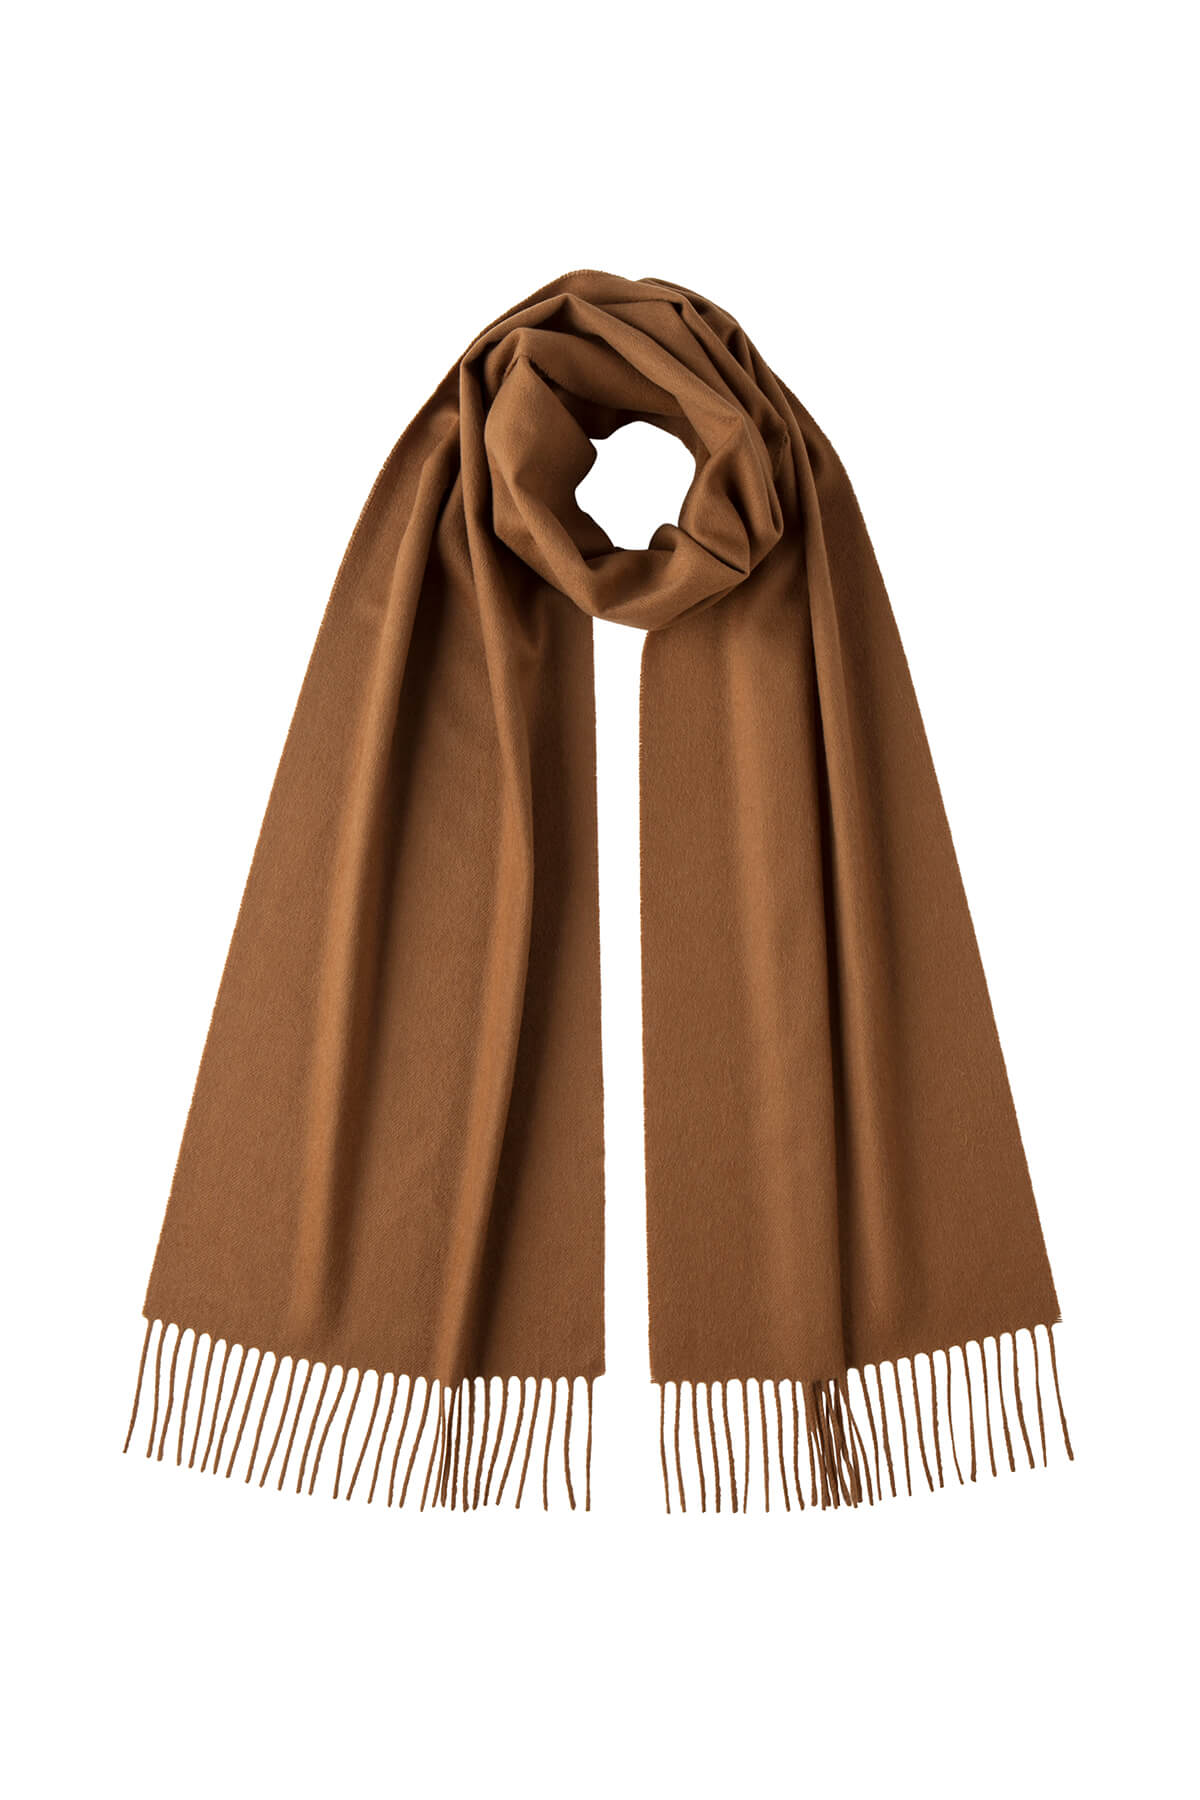 Johnstons of Elgin Pure Vicuña Scarf on a white background WR000025SB3022ONE